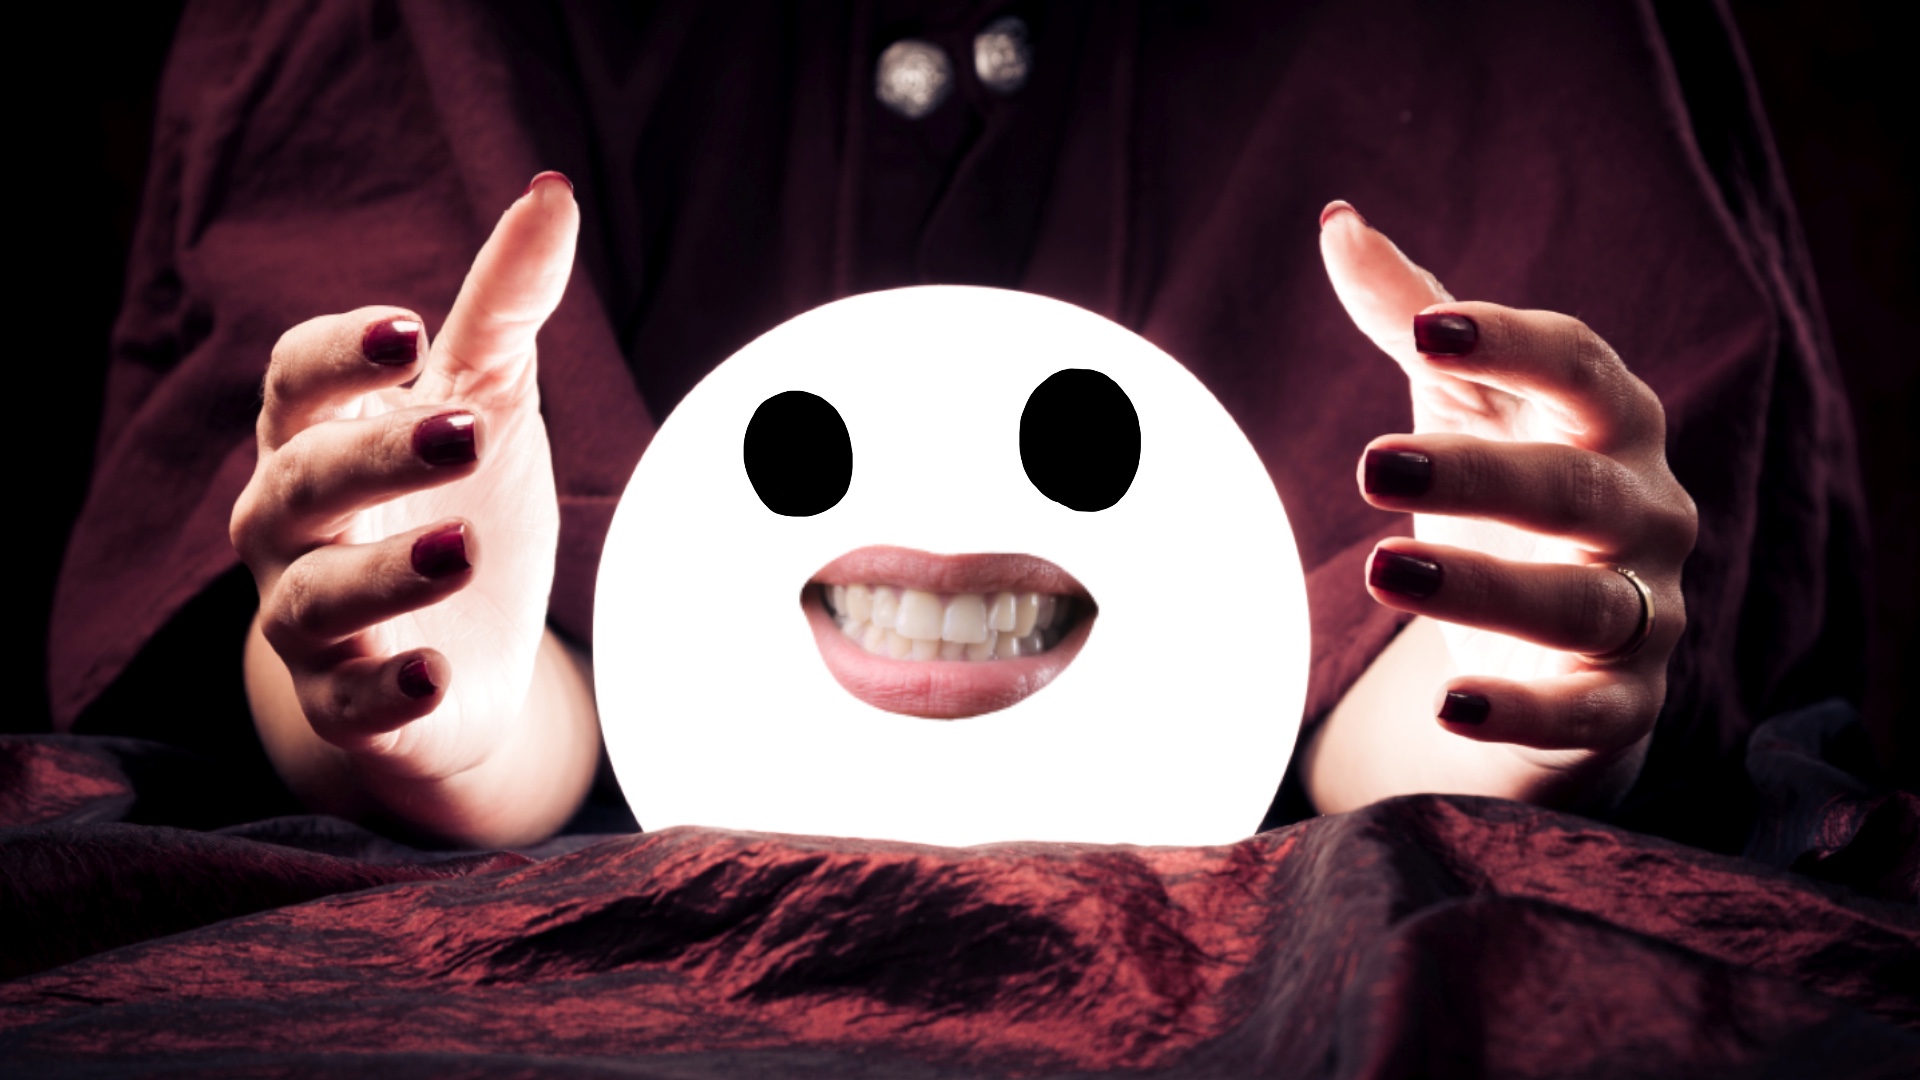 A smiling crystal ball